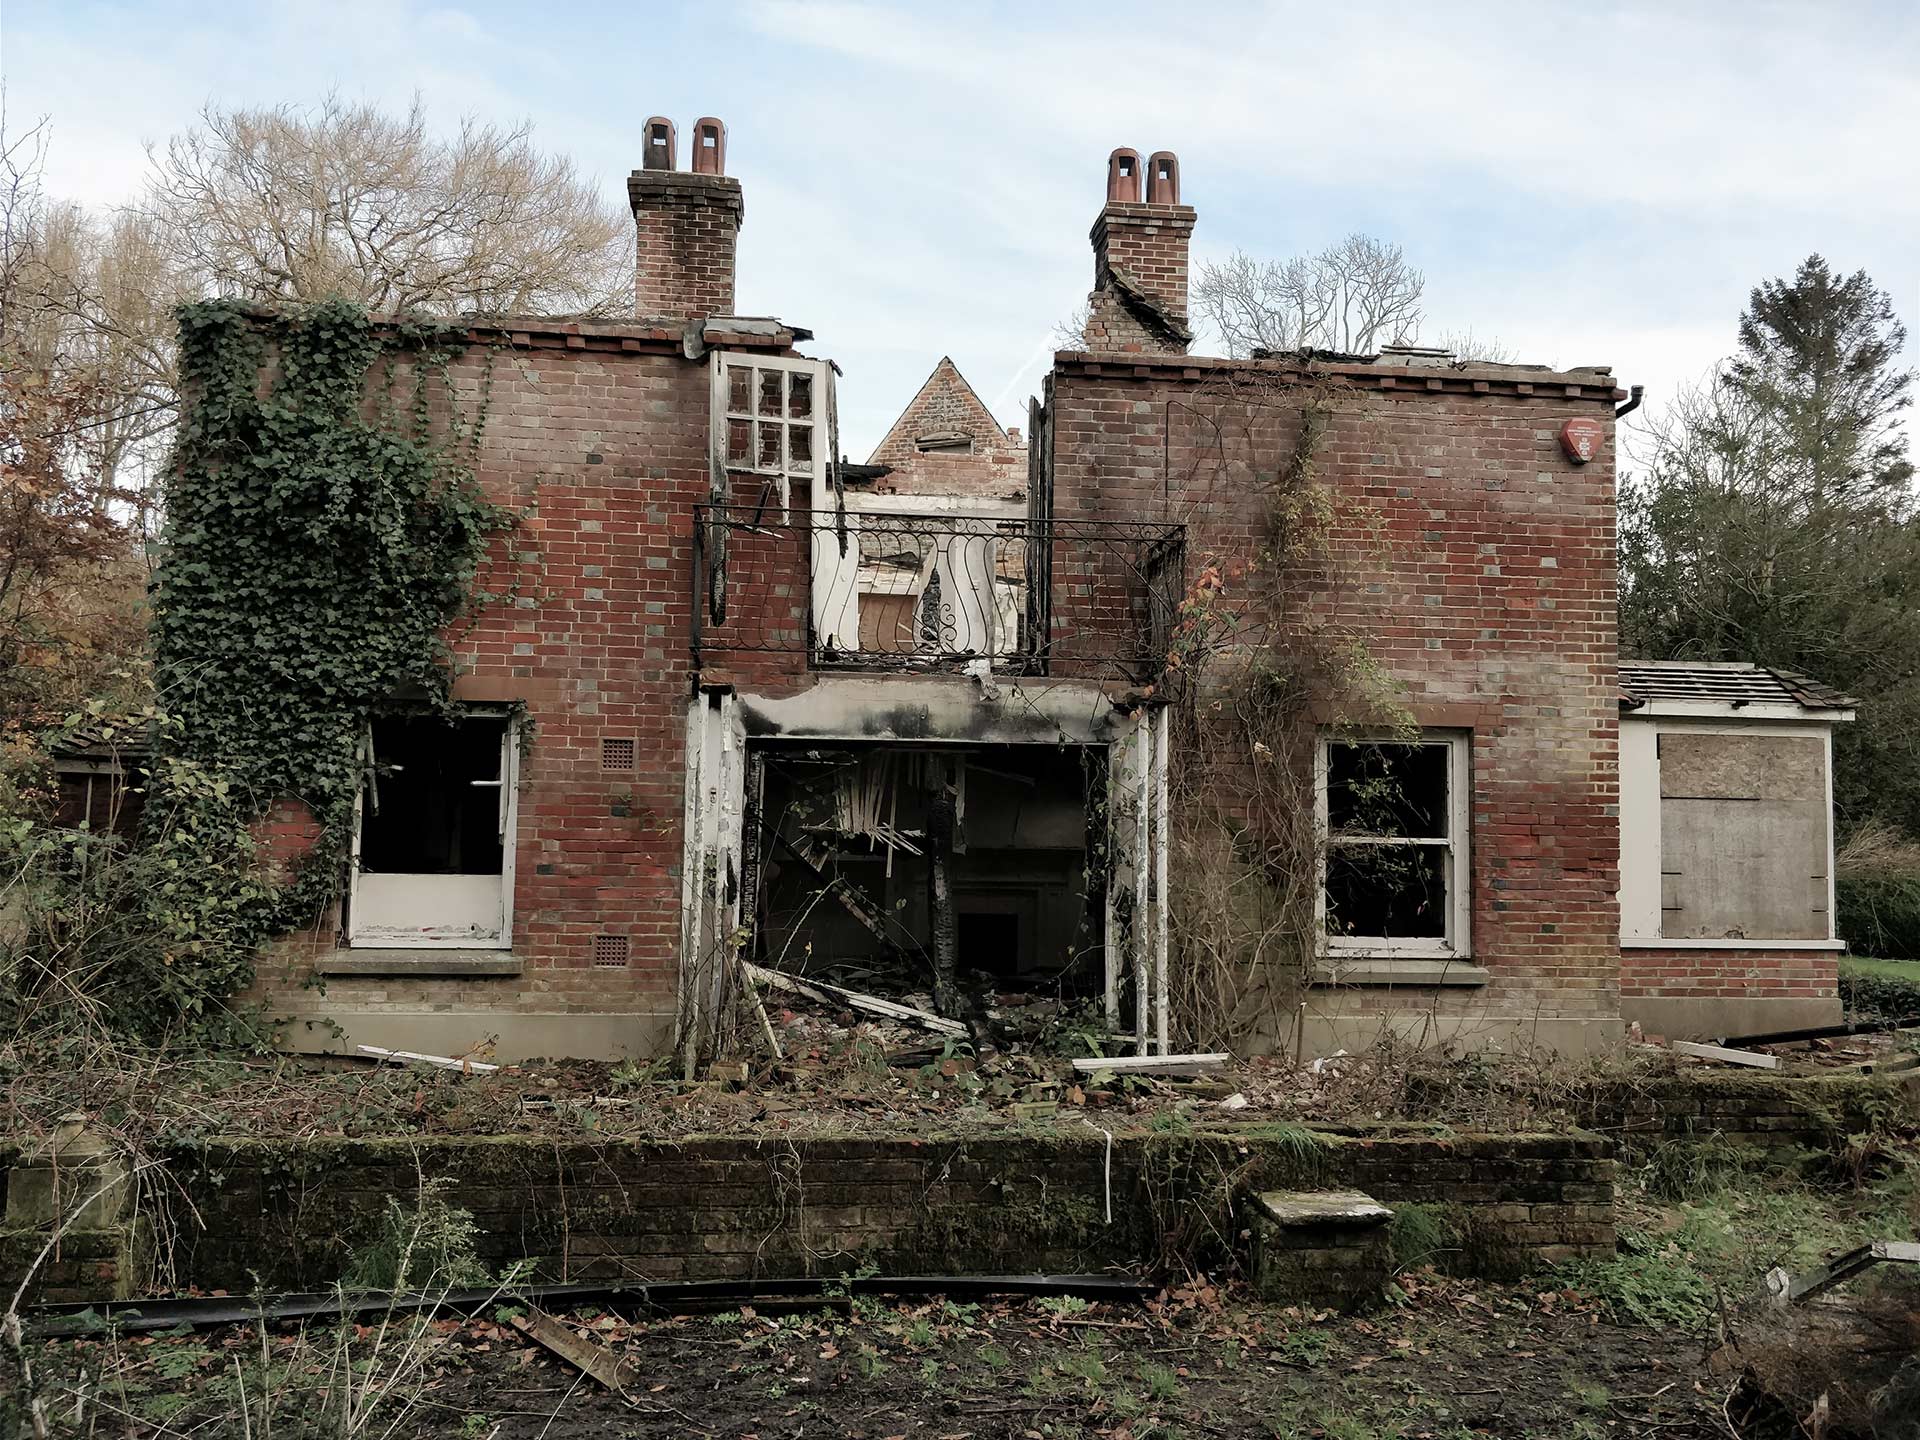 existing before photo of dilapidated red brick building with roof collapsed and doors fallen down